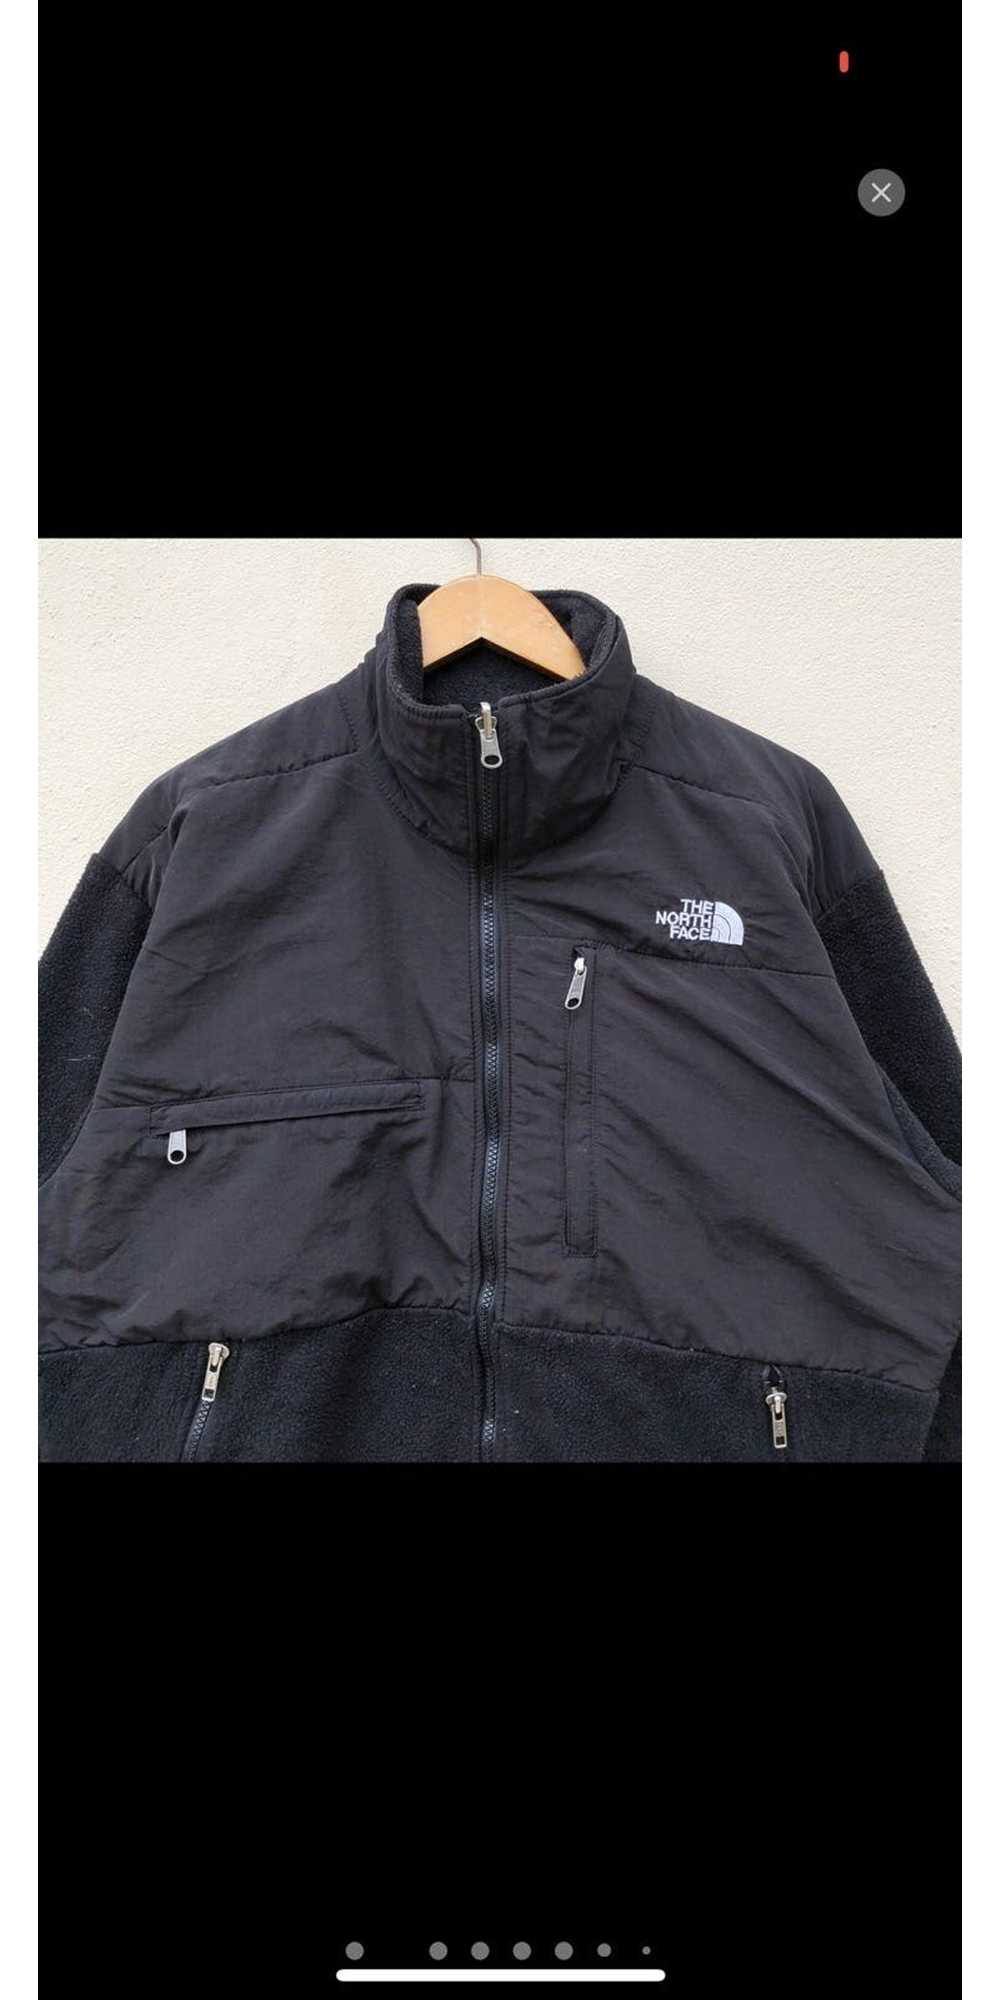 The North Face North Face Jacket - image 3